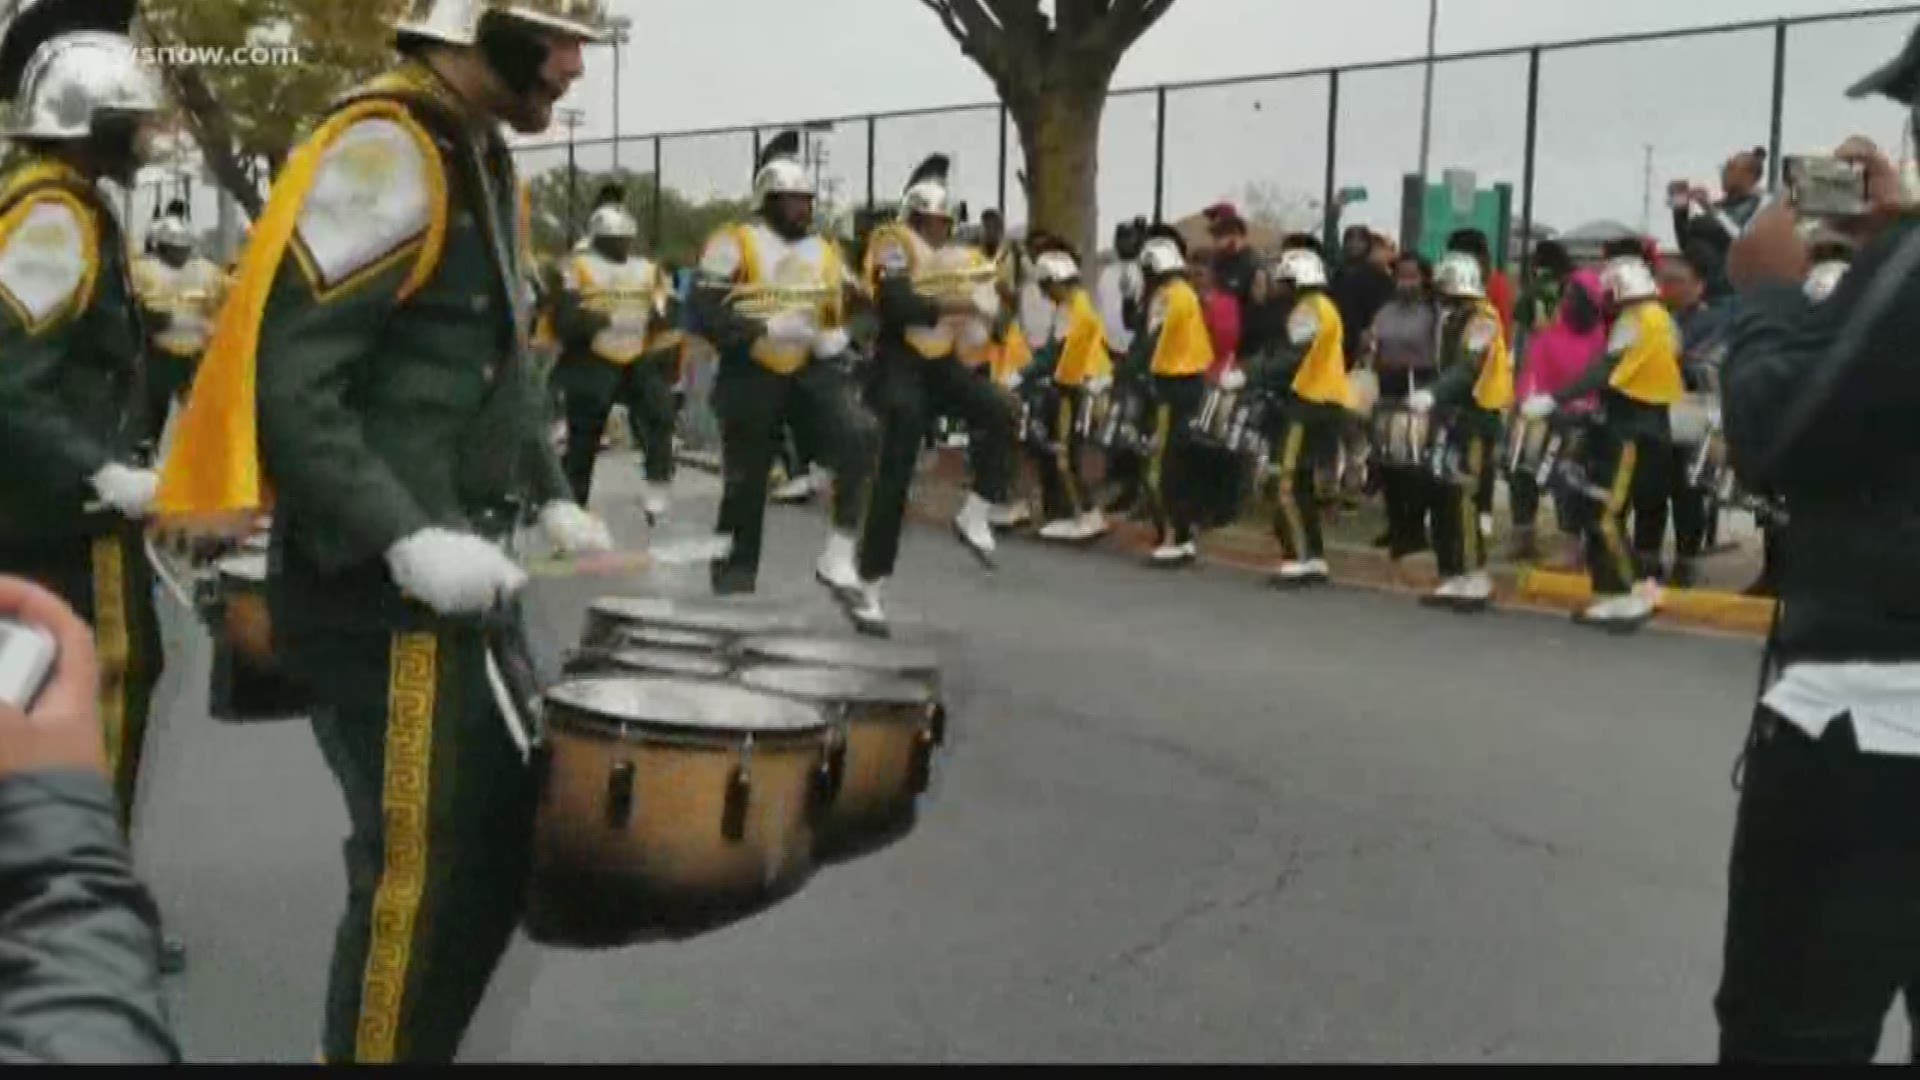 Norfolk State's Spartan Legion is getting national recognition after being featured on an album that won a Grammy.